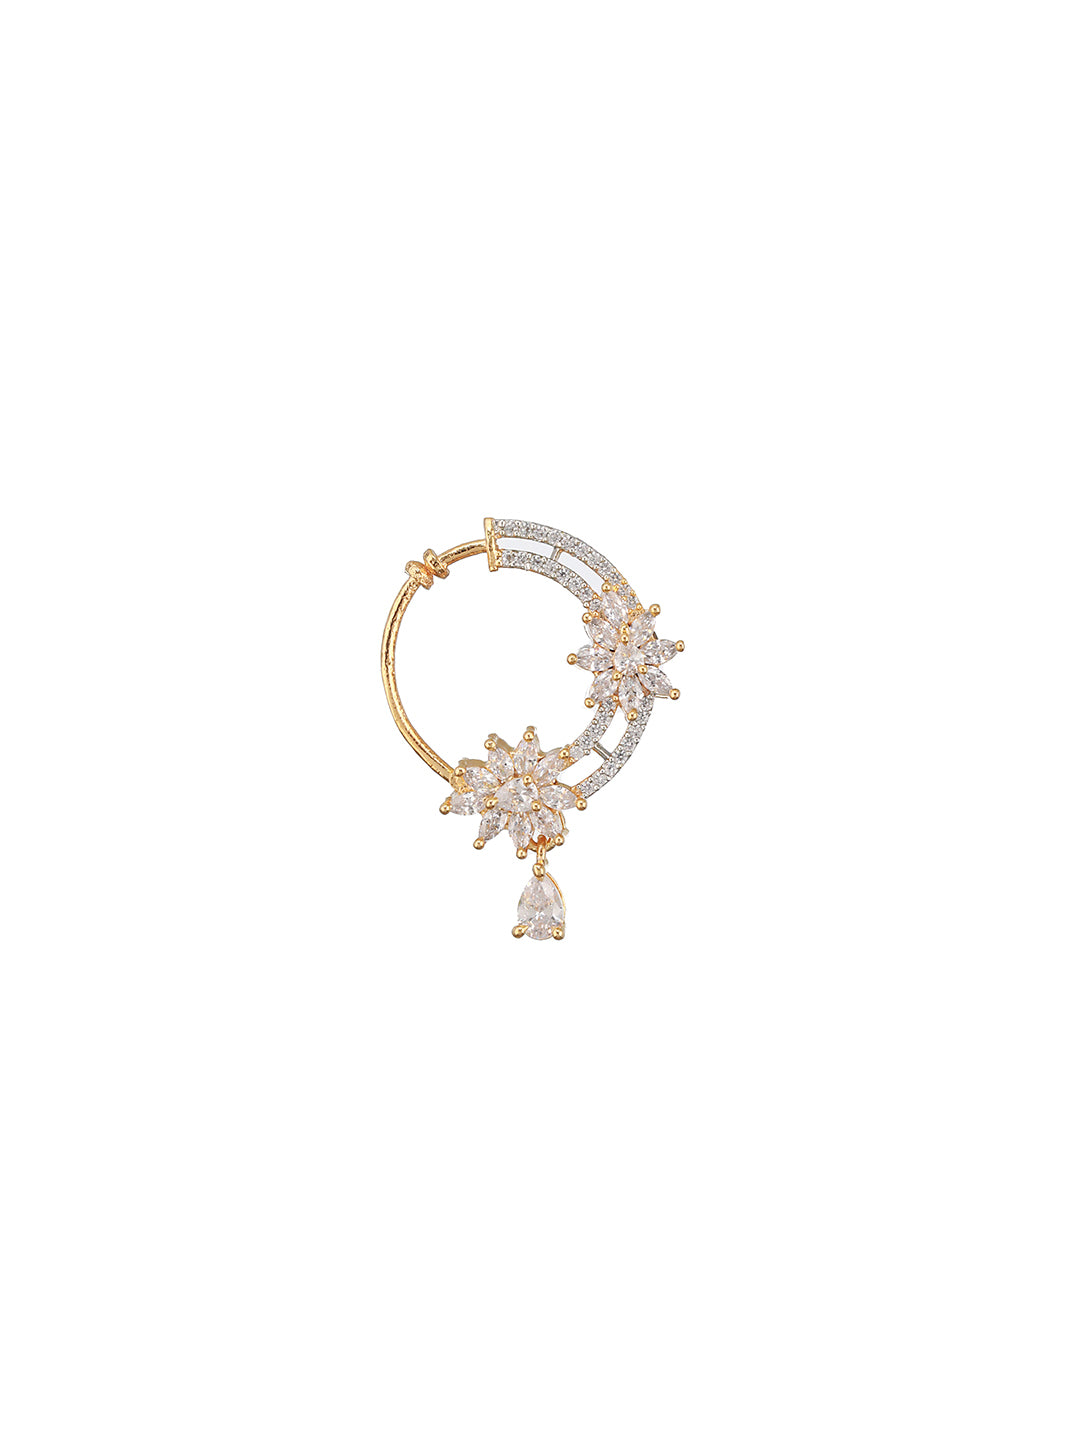 Gold Plated AD Studded Floral Pressing Nose Ring Nath